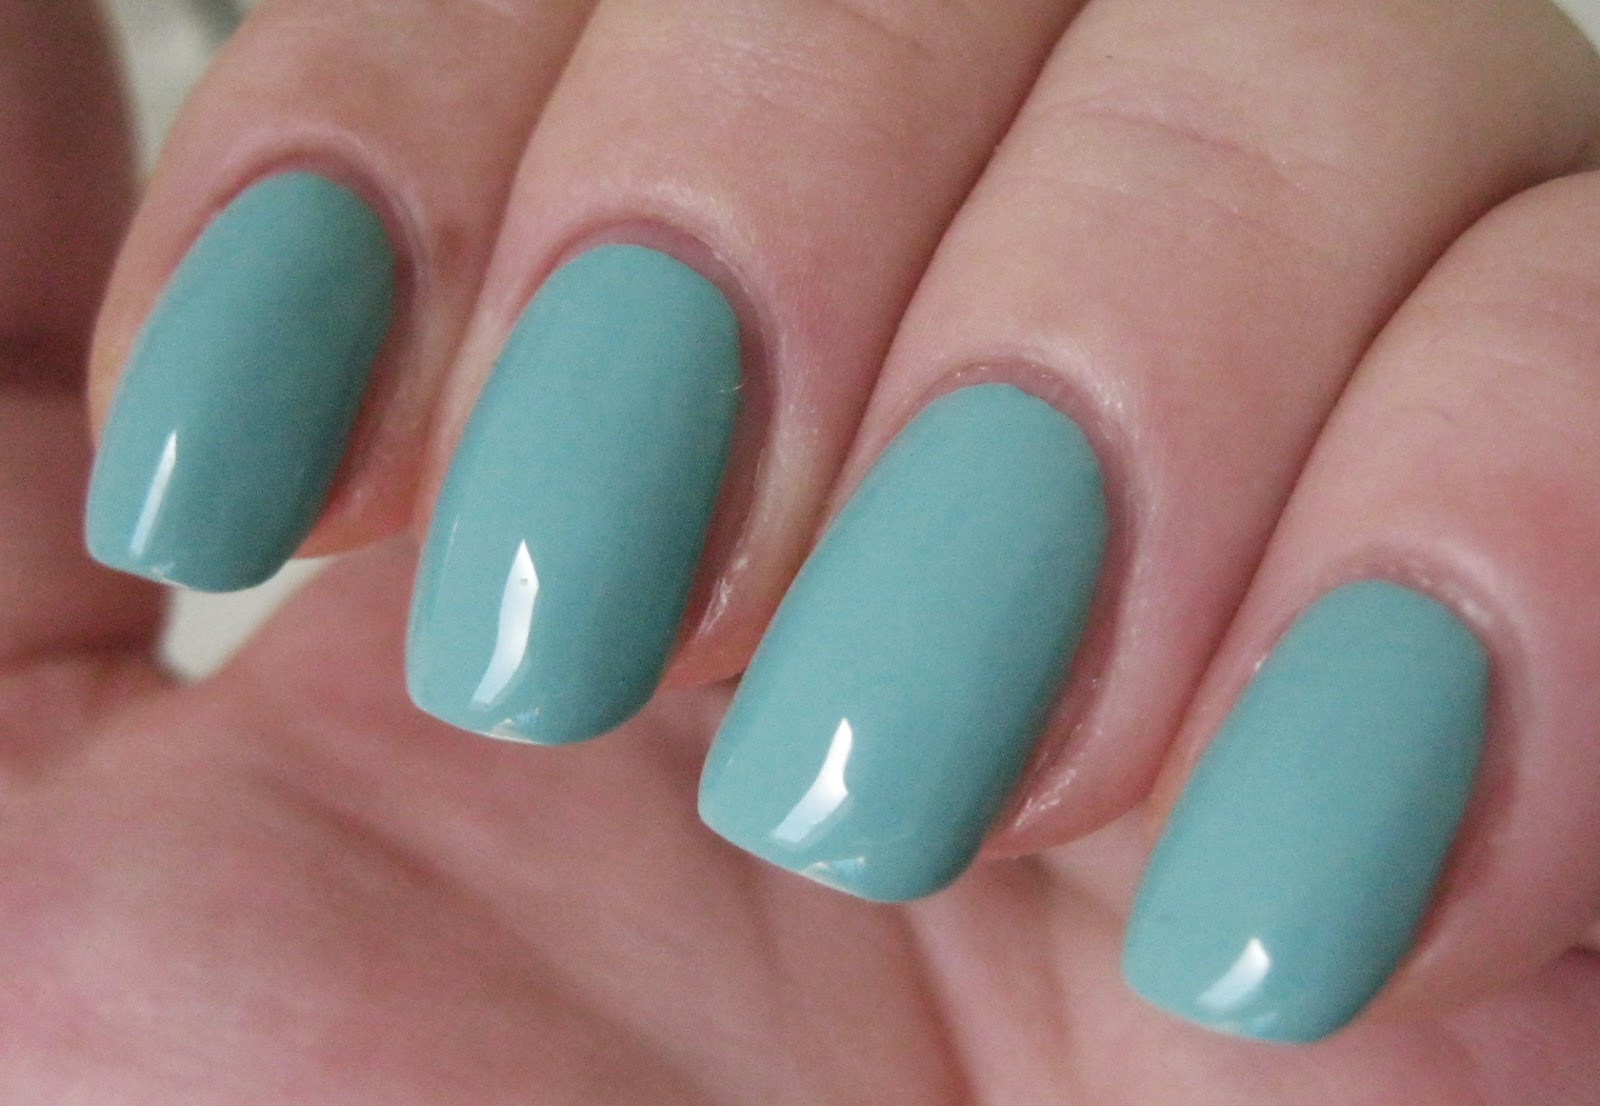 China Glaze Nail Lacquer in For Audrey - wide 2